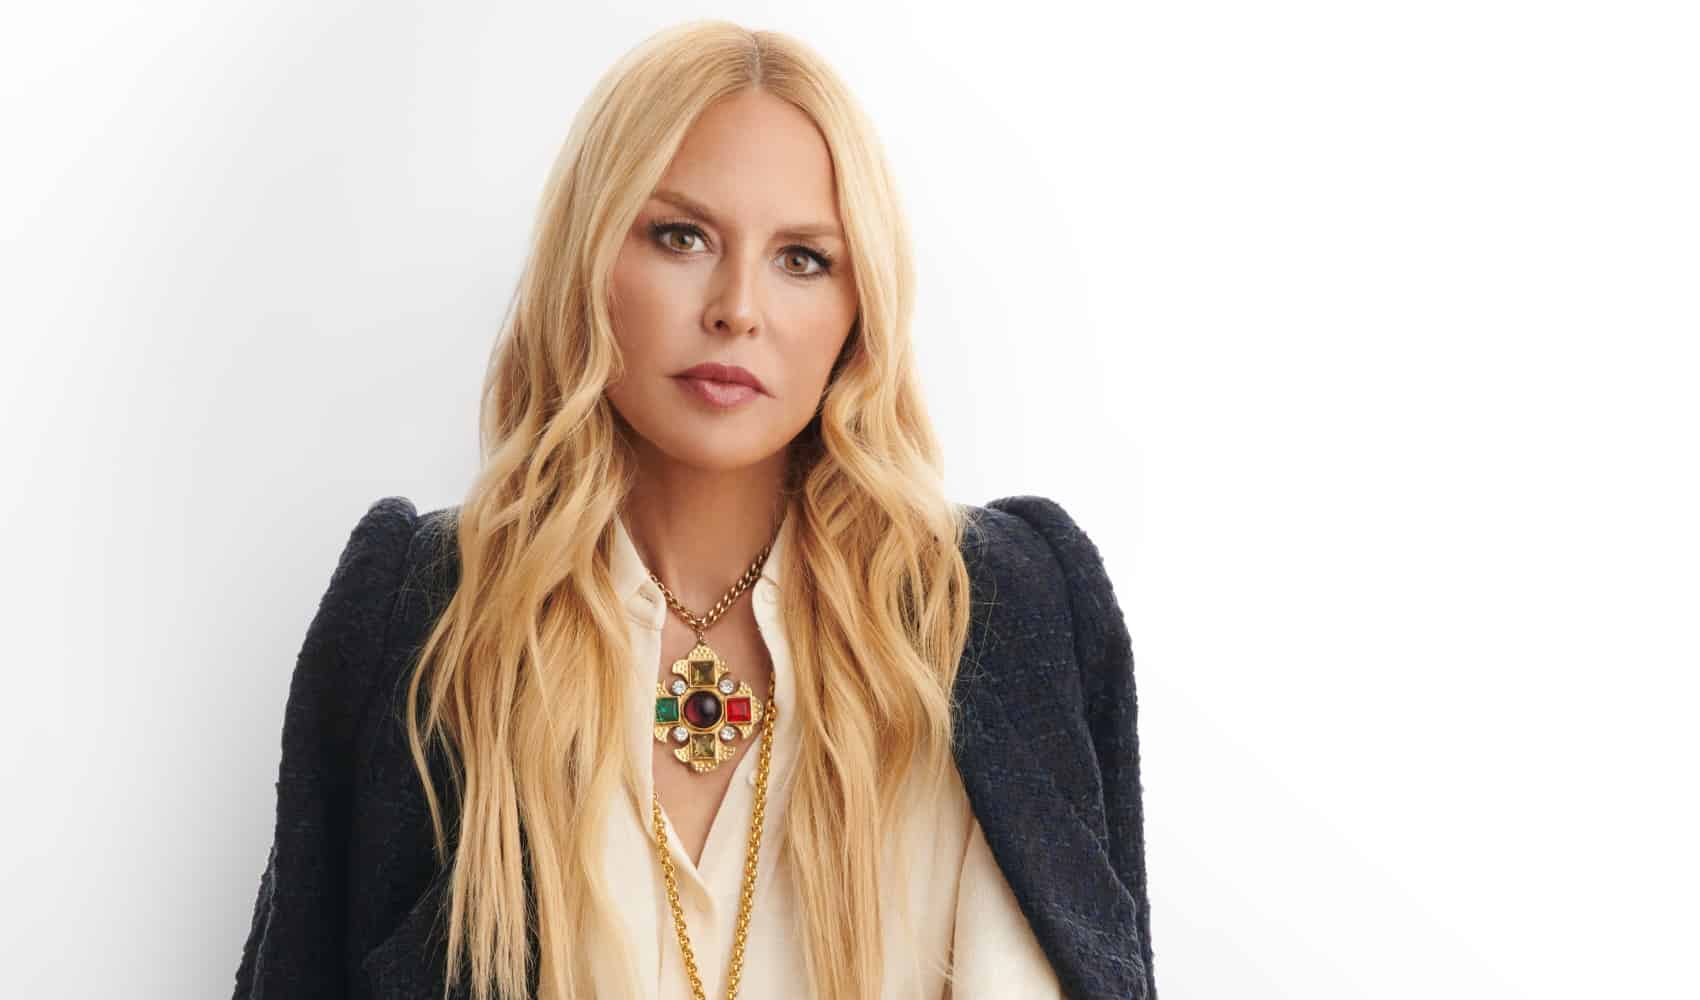 Daily Media: Rachel Zoe's New Gig With Express, C-Suite Hires At